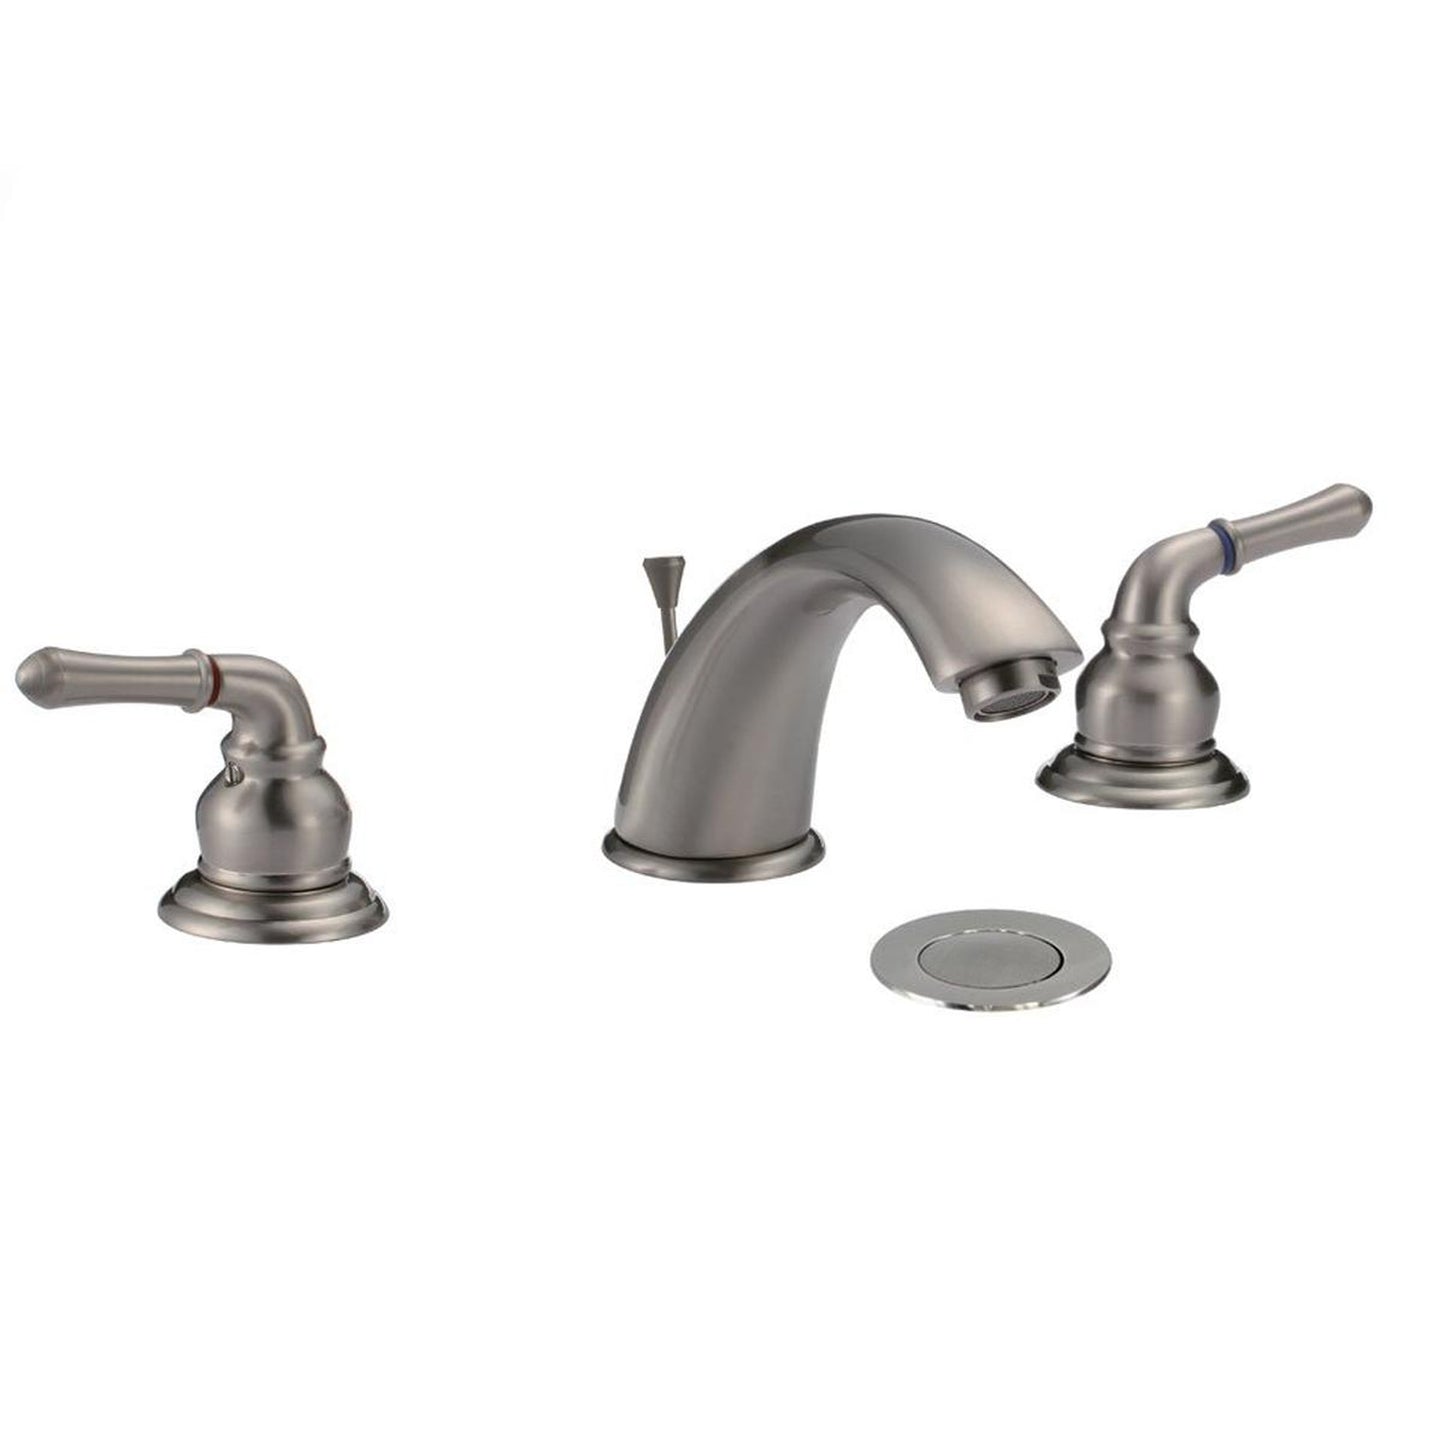 Pelican Int'l Cascade Series PL-8303 Three Hole Bathroom Faucet In Brushed Nickel Finish